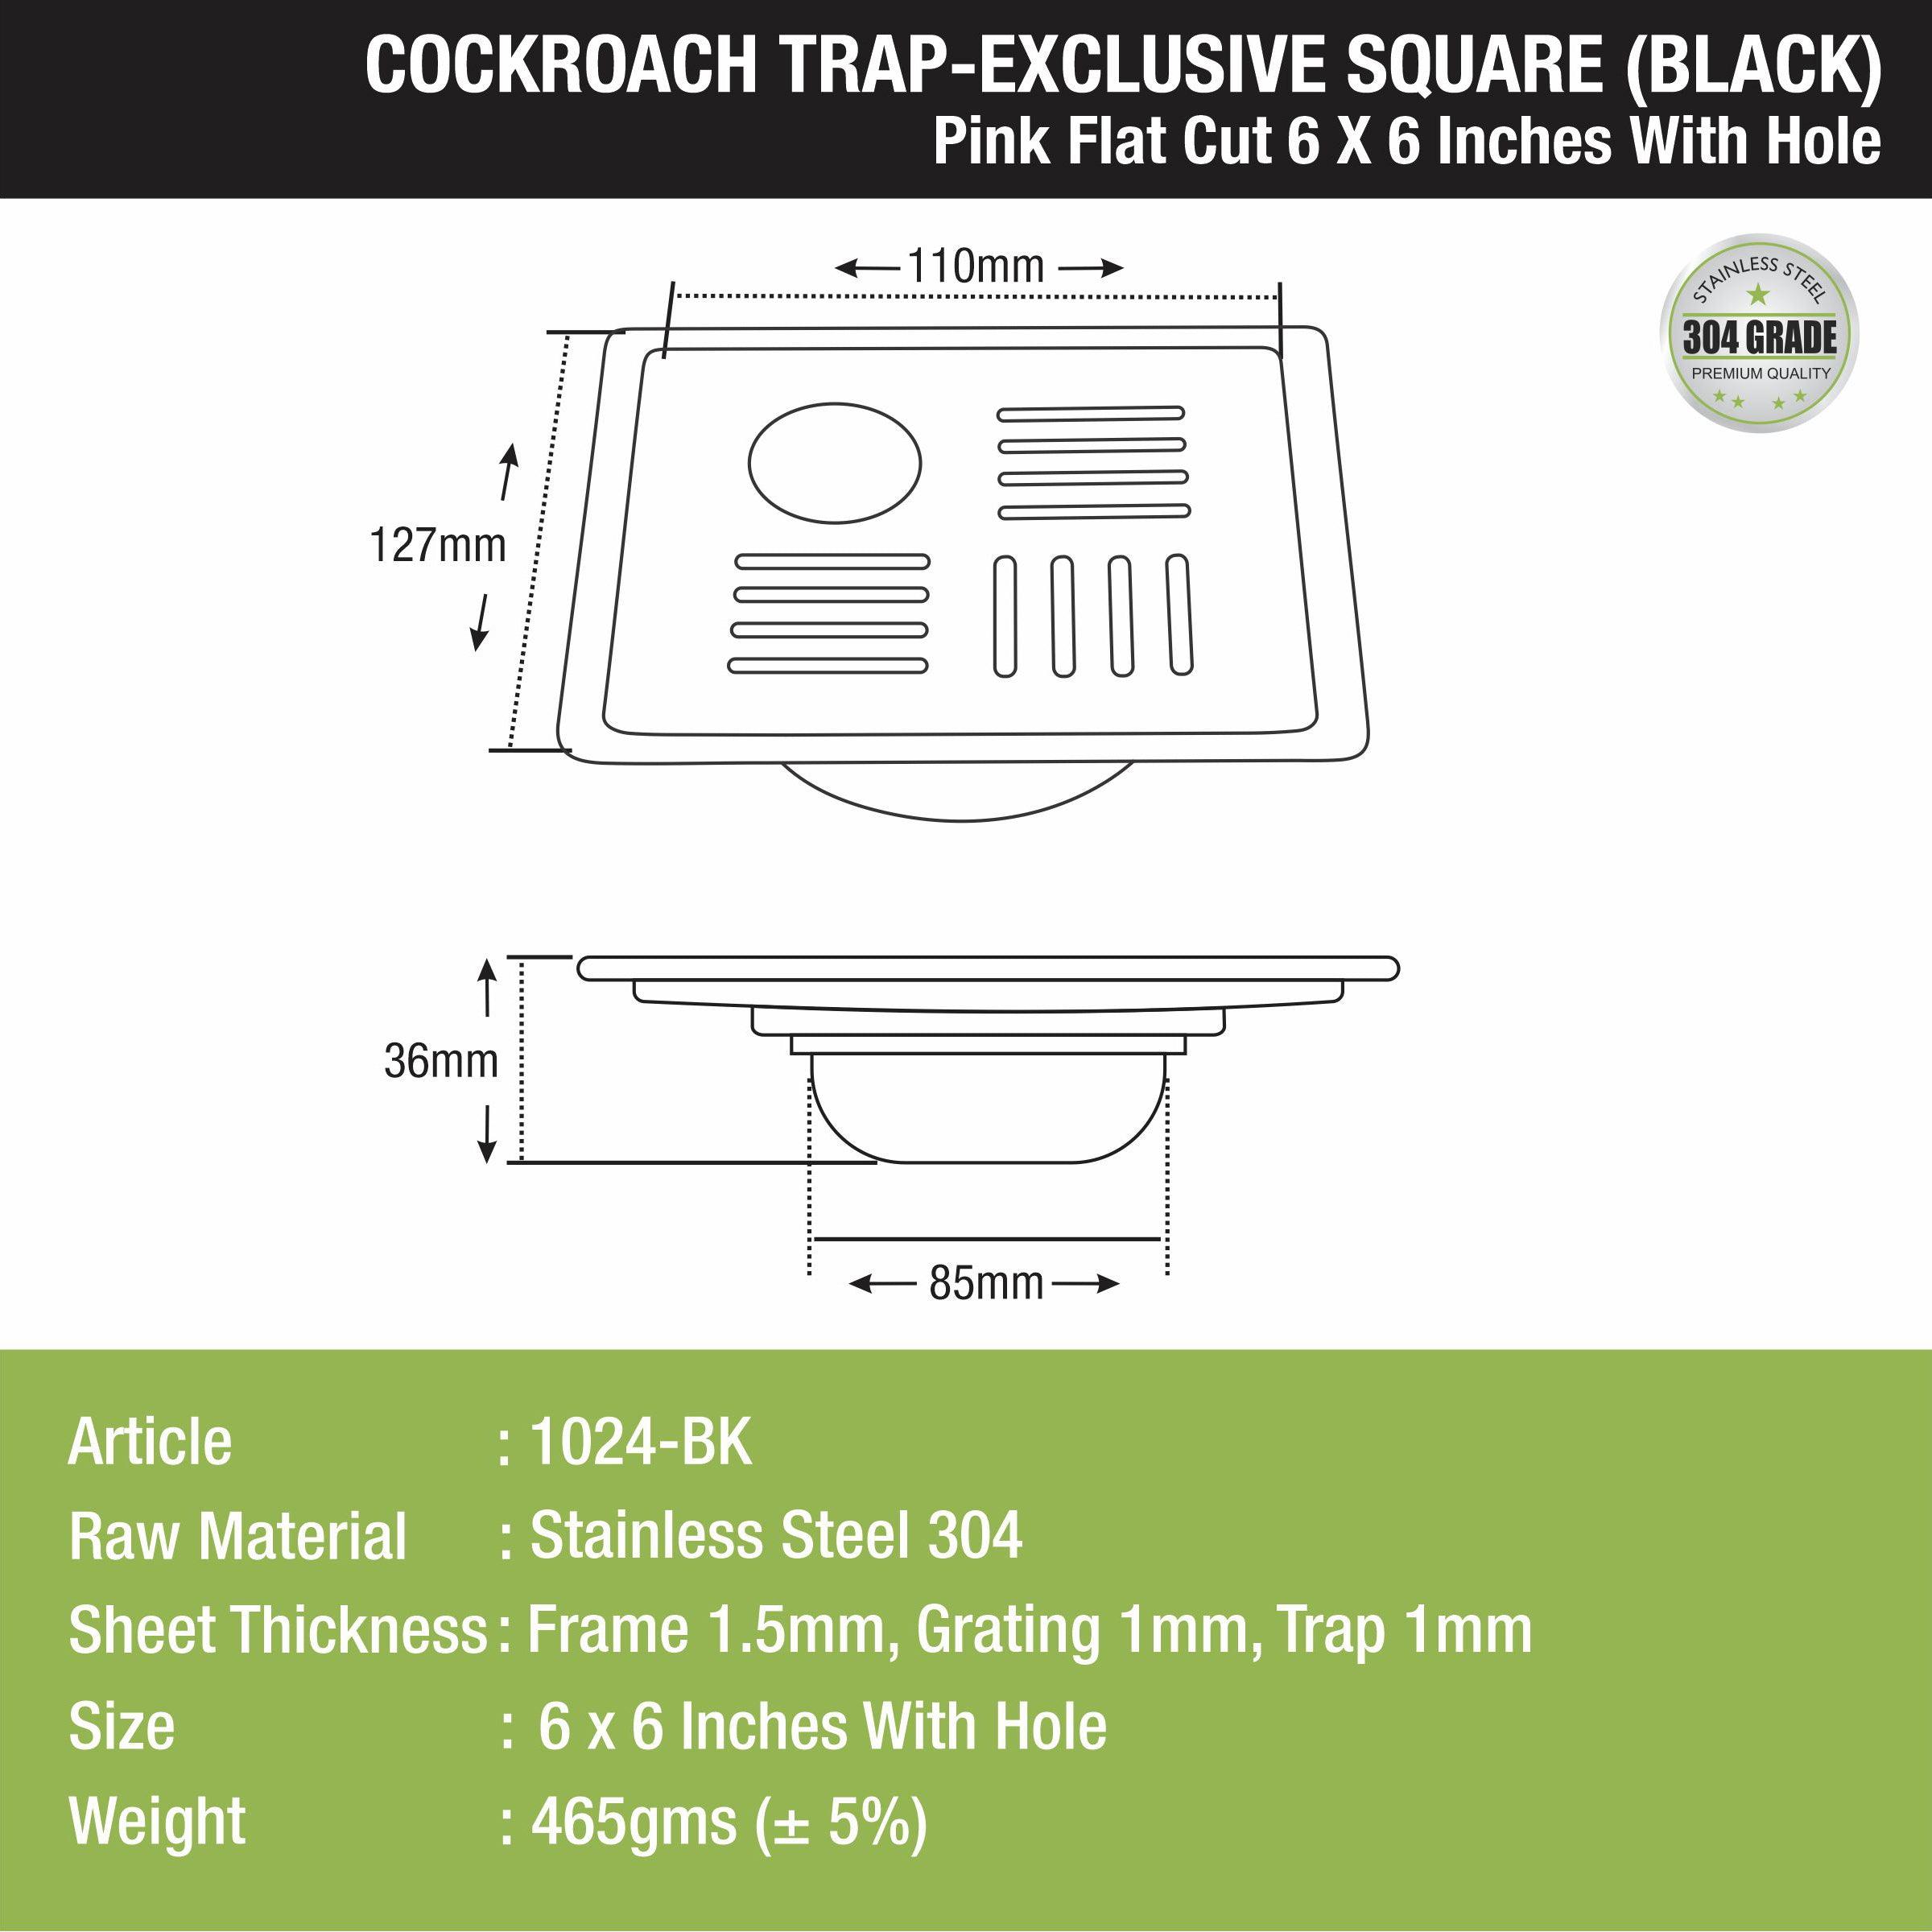 Pink Exclusive Square Flat Cut Floor Drain in Black PVD Coating (6 x 6 Inches) with Hole & Cockroach Trap size and measurement